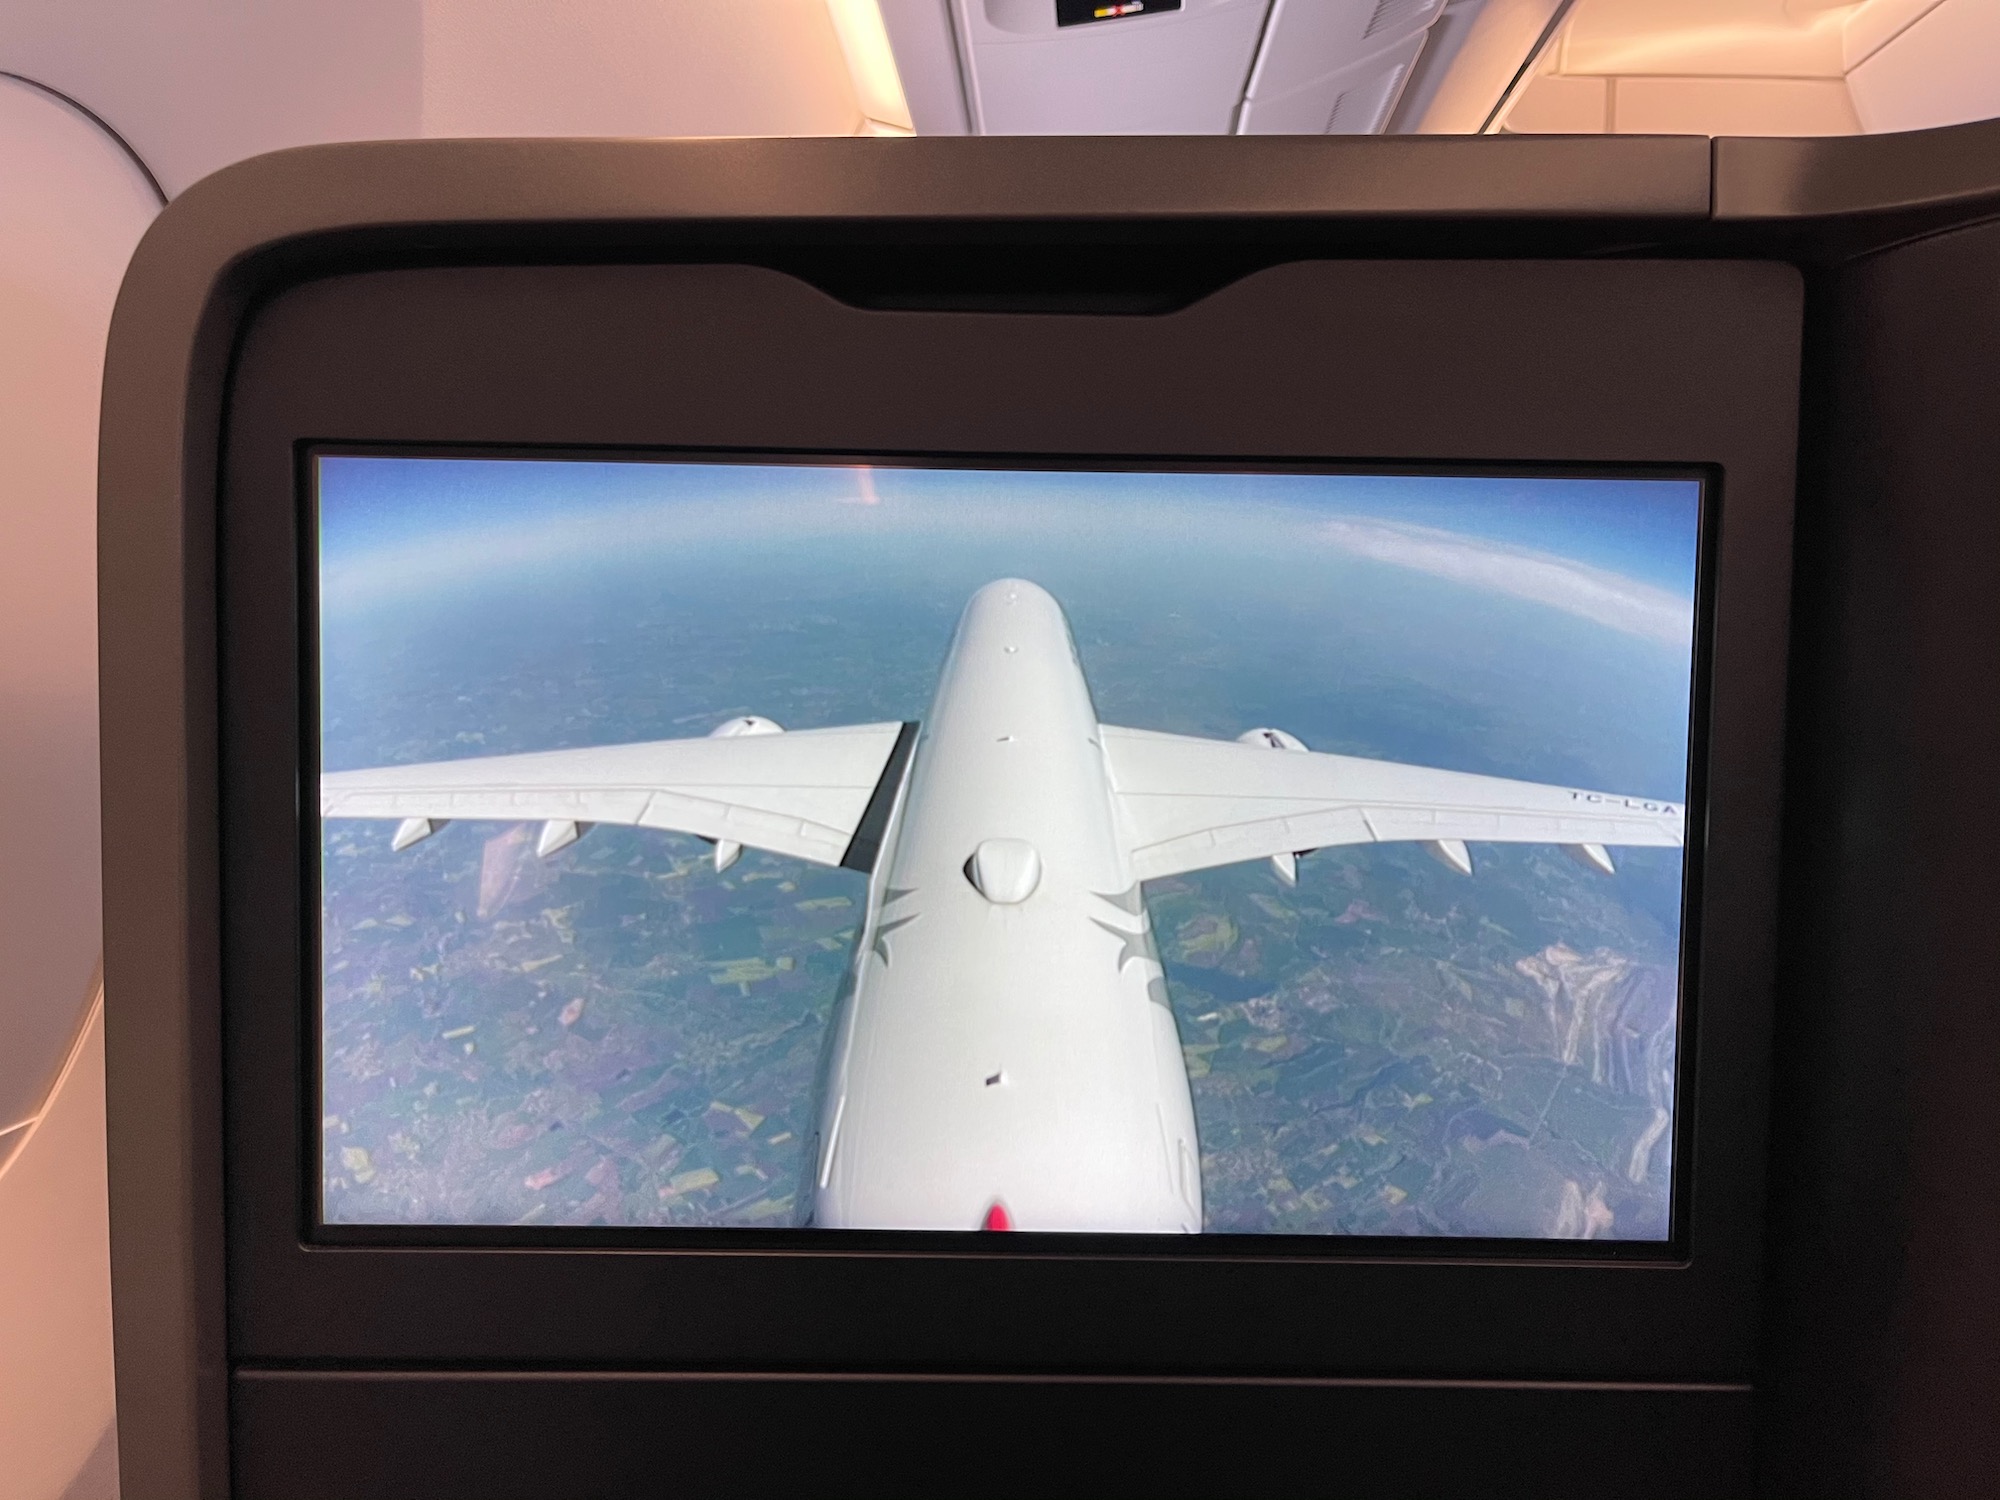 a screen with a plane wing in the air